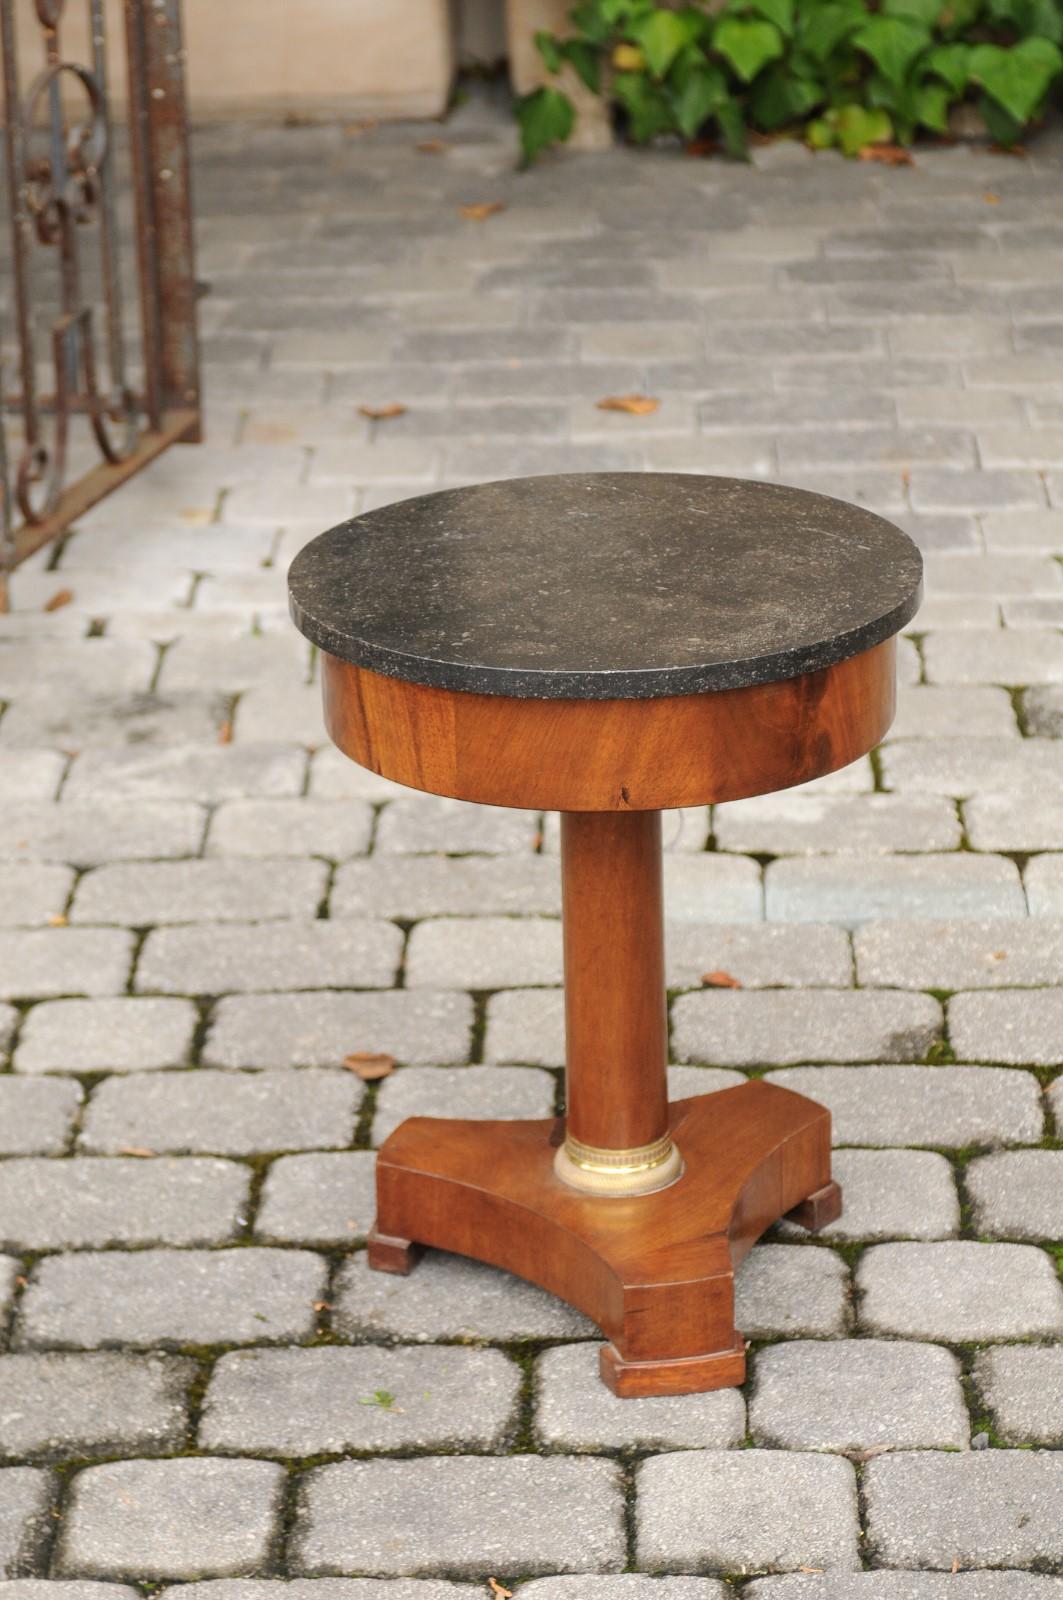 Petite 1870s French Empire Style Guéridon Table with Marble Top and Pedestal 5